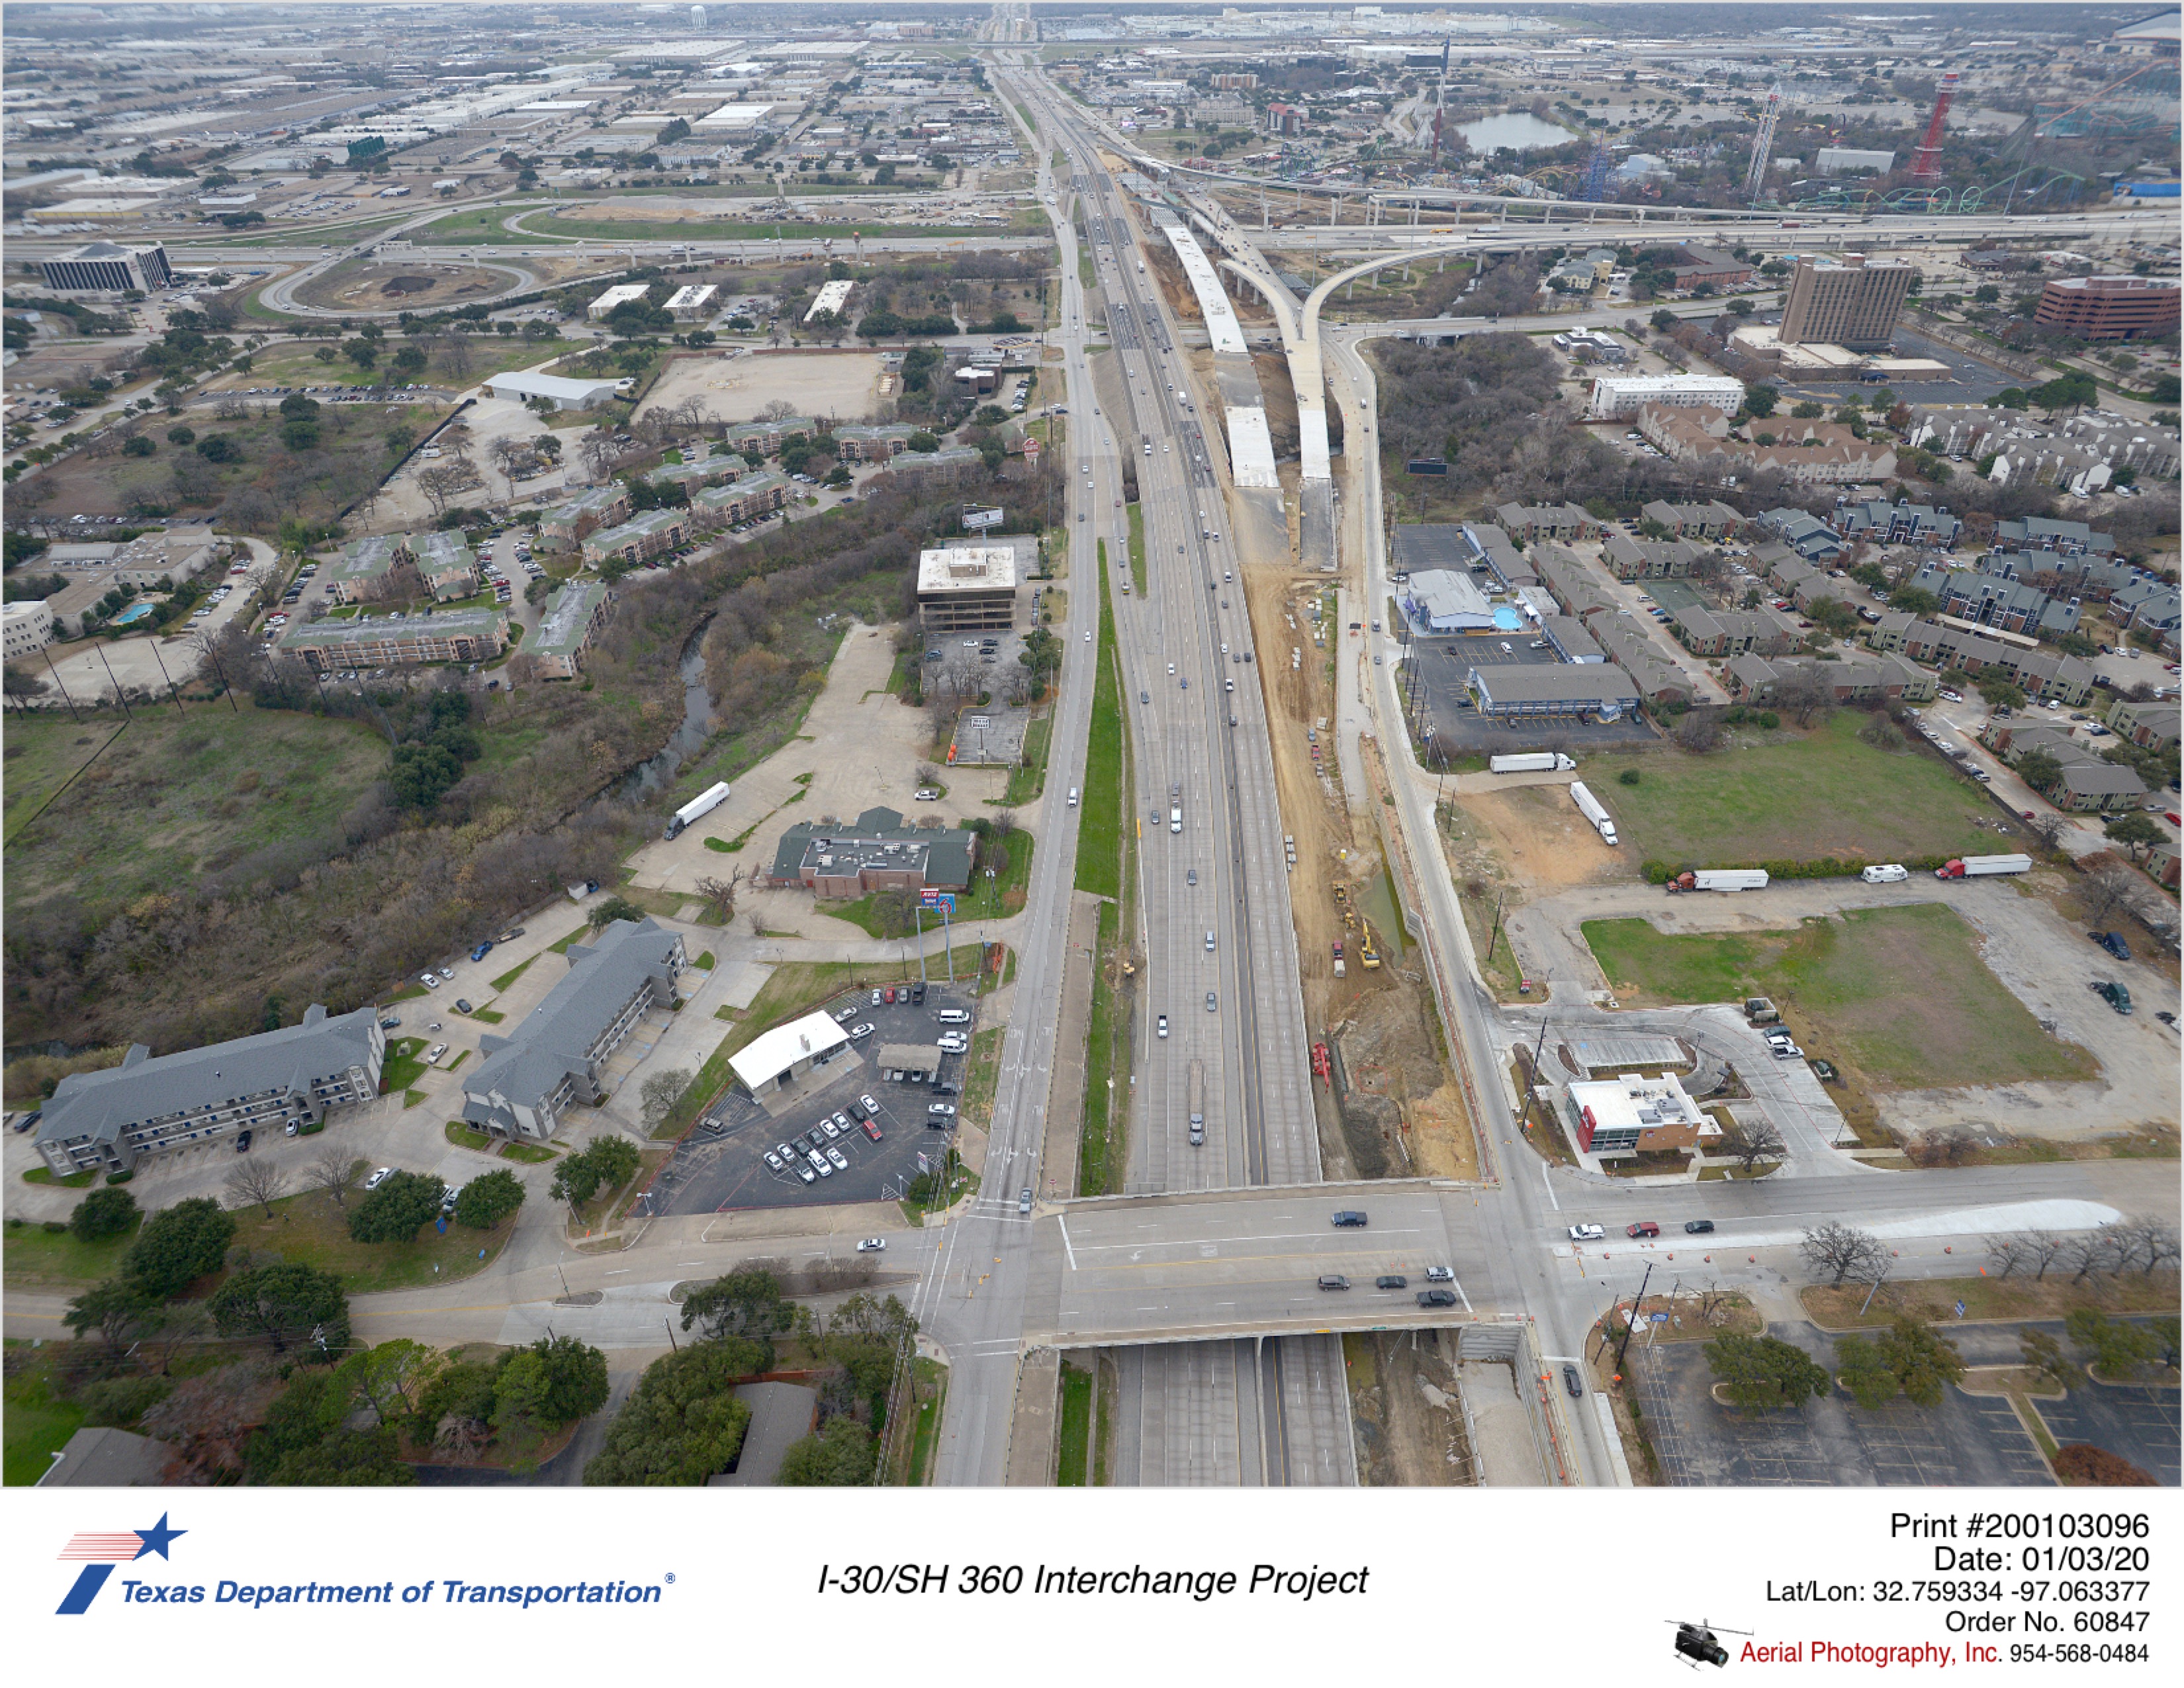 SH 360 looking south with I-30 in background, and Ave J in foreground. Construction of new SH 360 southbound mainlane bridge, pavement, and inside portion of southbound frontage road is shown.